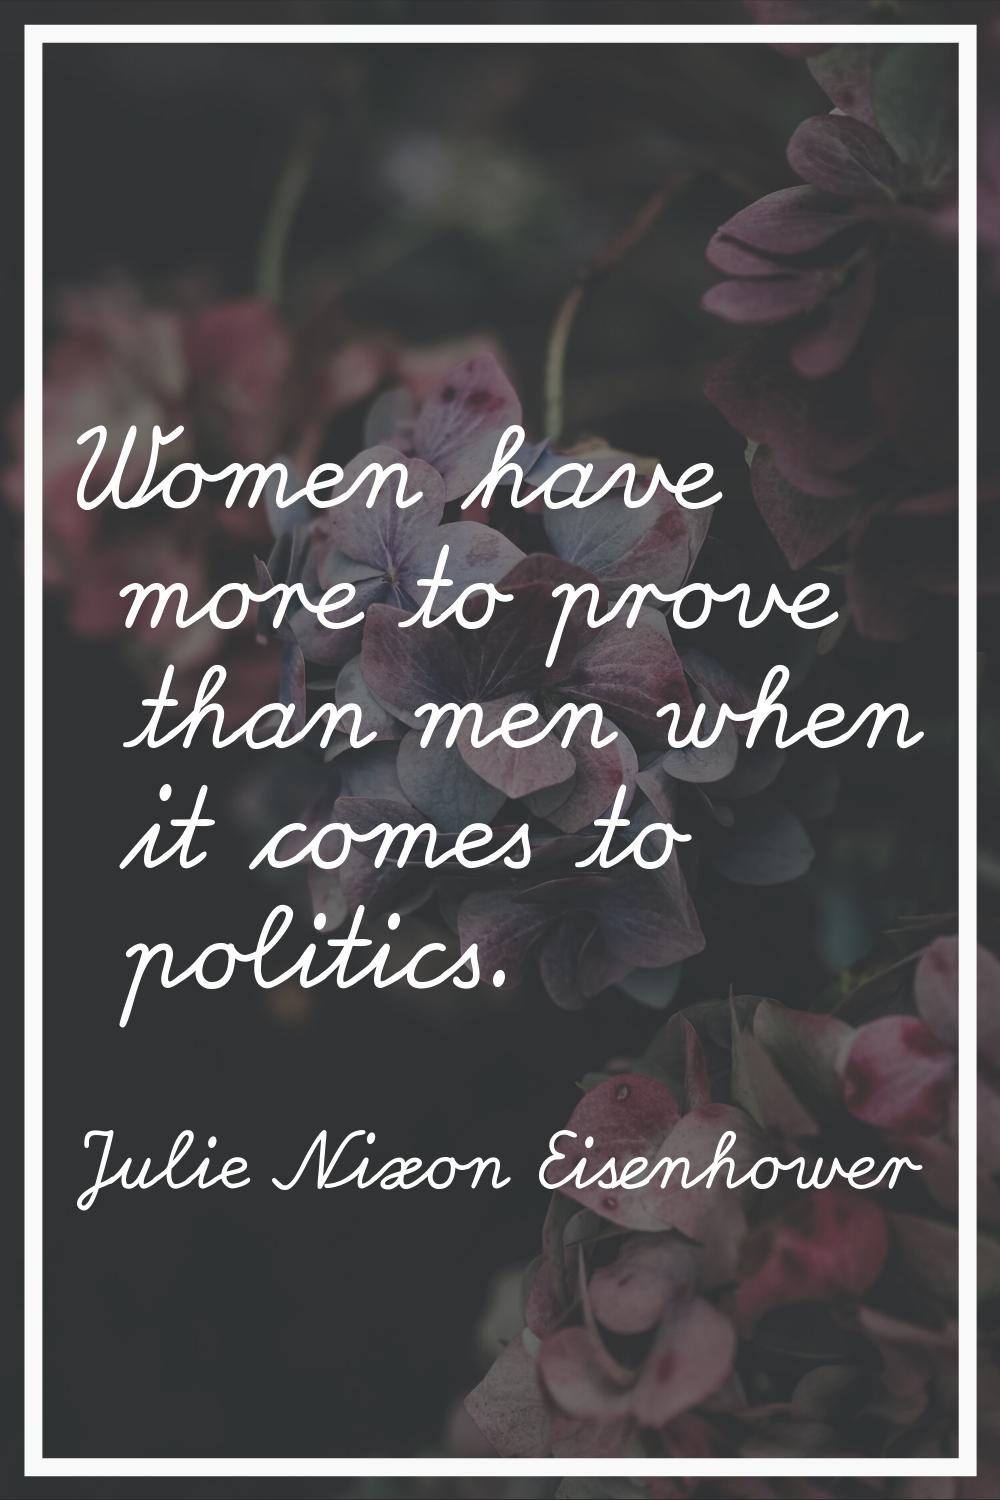 Women have more to prove than men when it comes to politics.